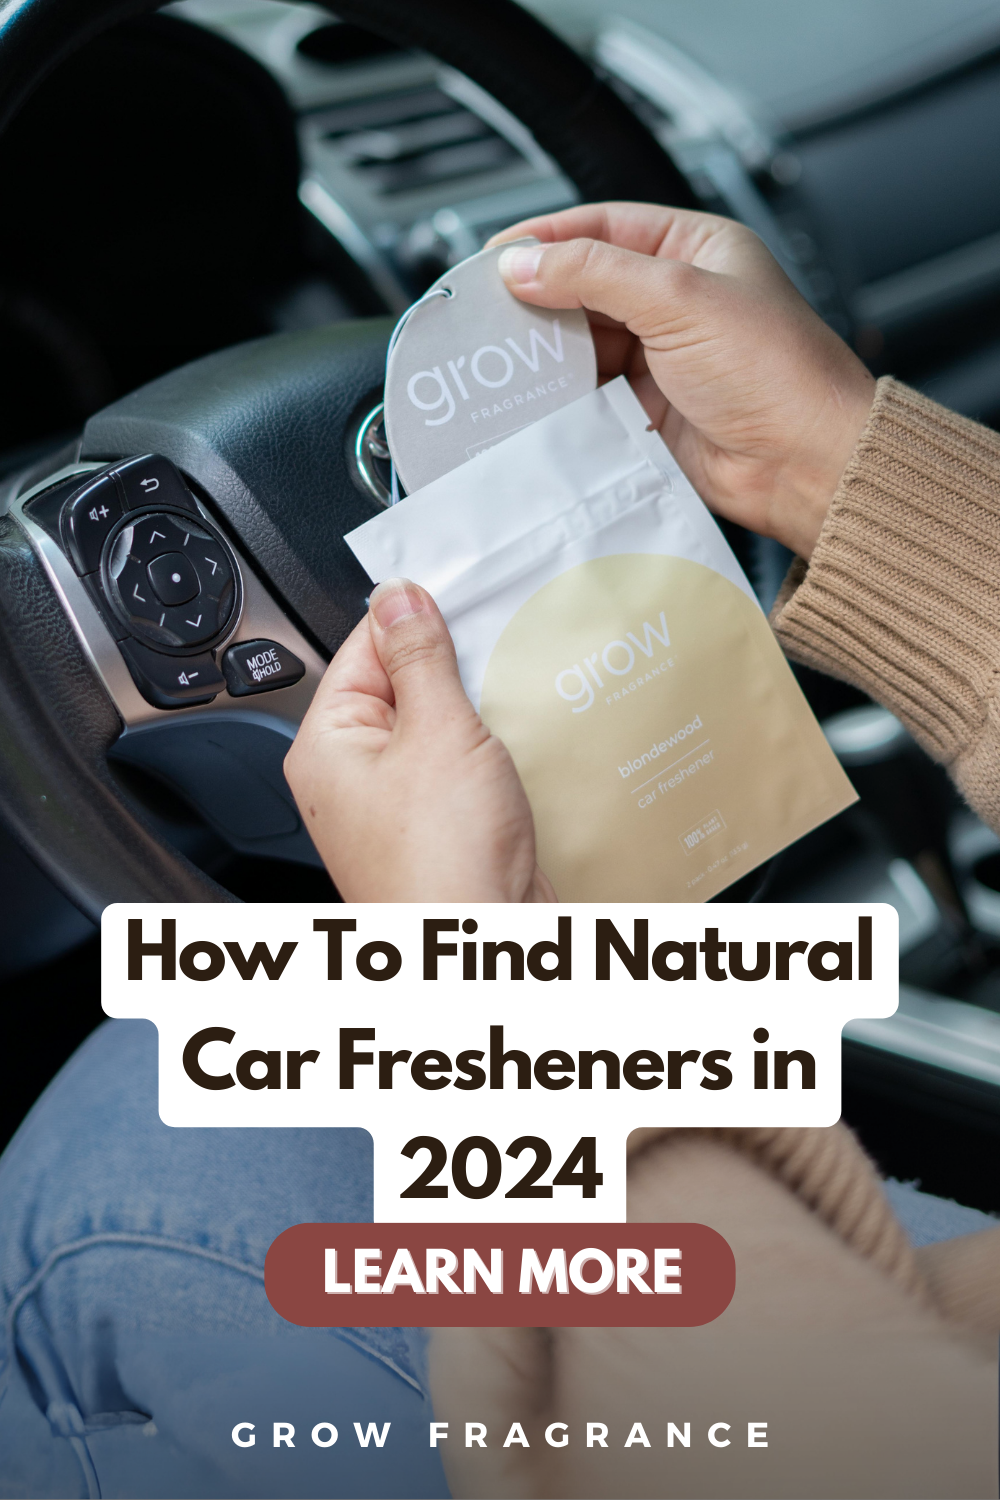 Hand inside a black luxury car, unboxing a natural car freshener with text 'How to Find Natural Car Fresheners in 2024